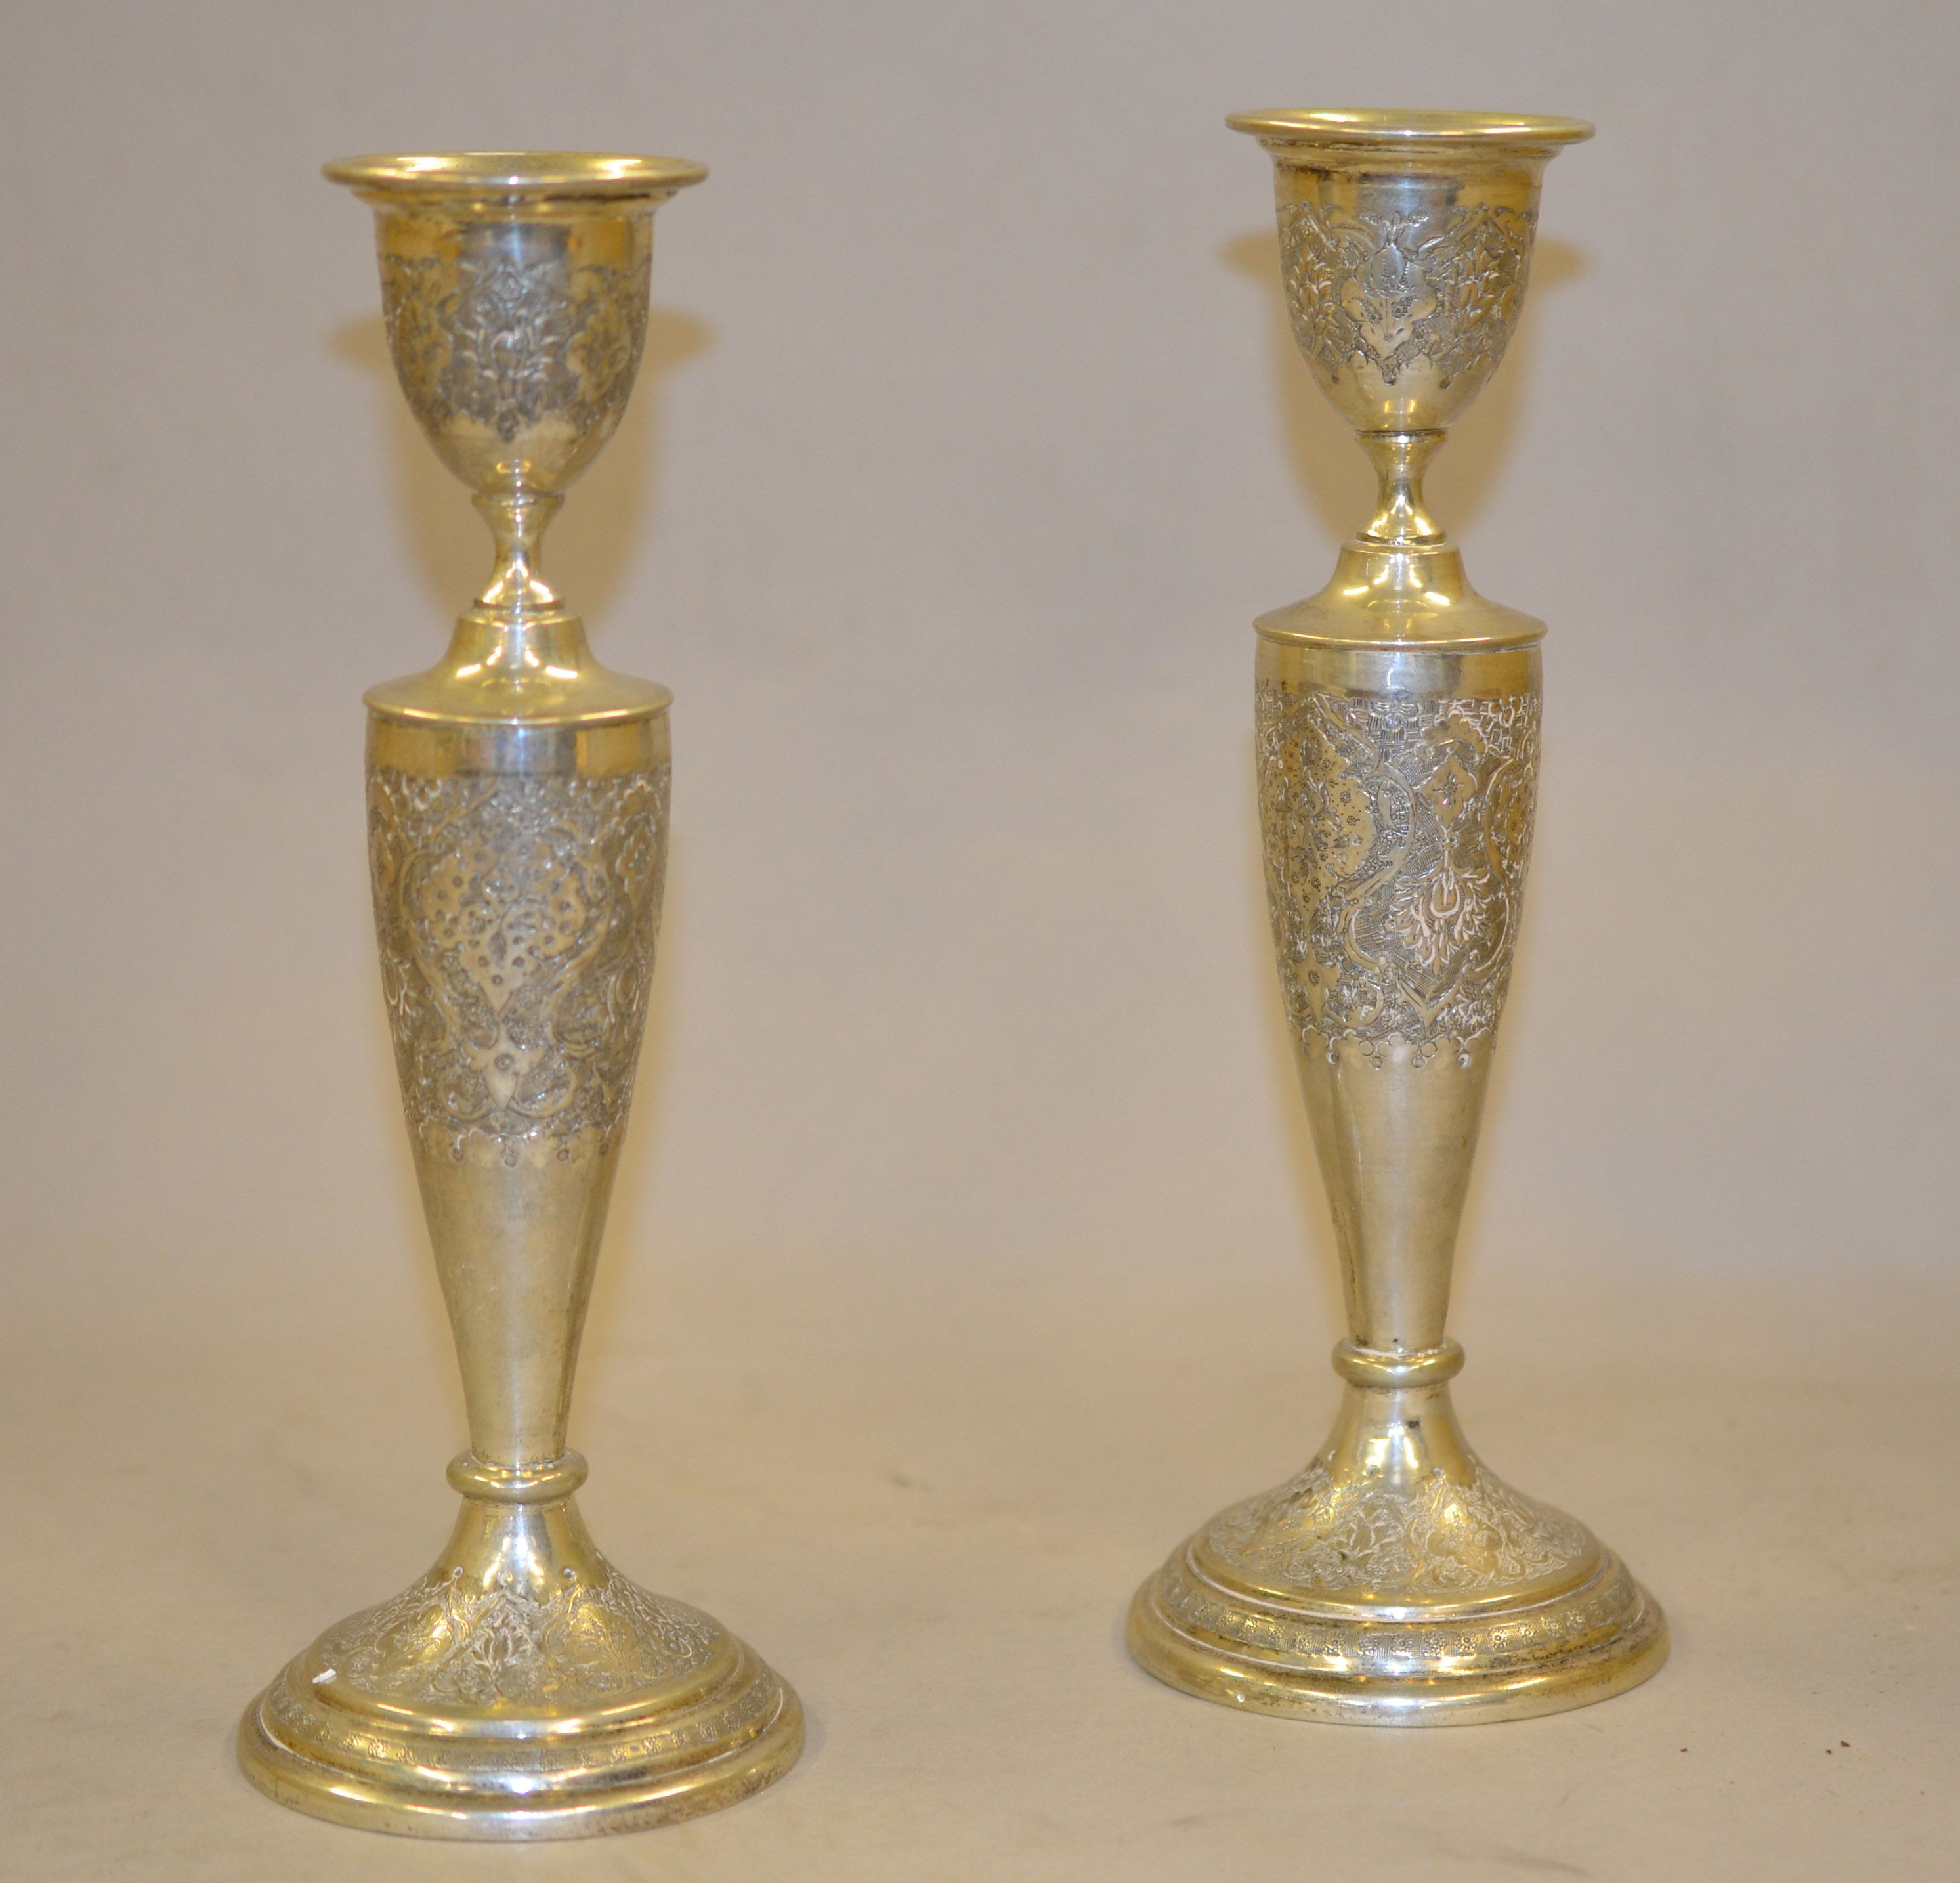 A pair of 'PERSIAN' white metal candlesticks with engraved decoration, approx 8.